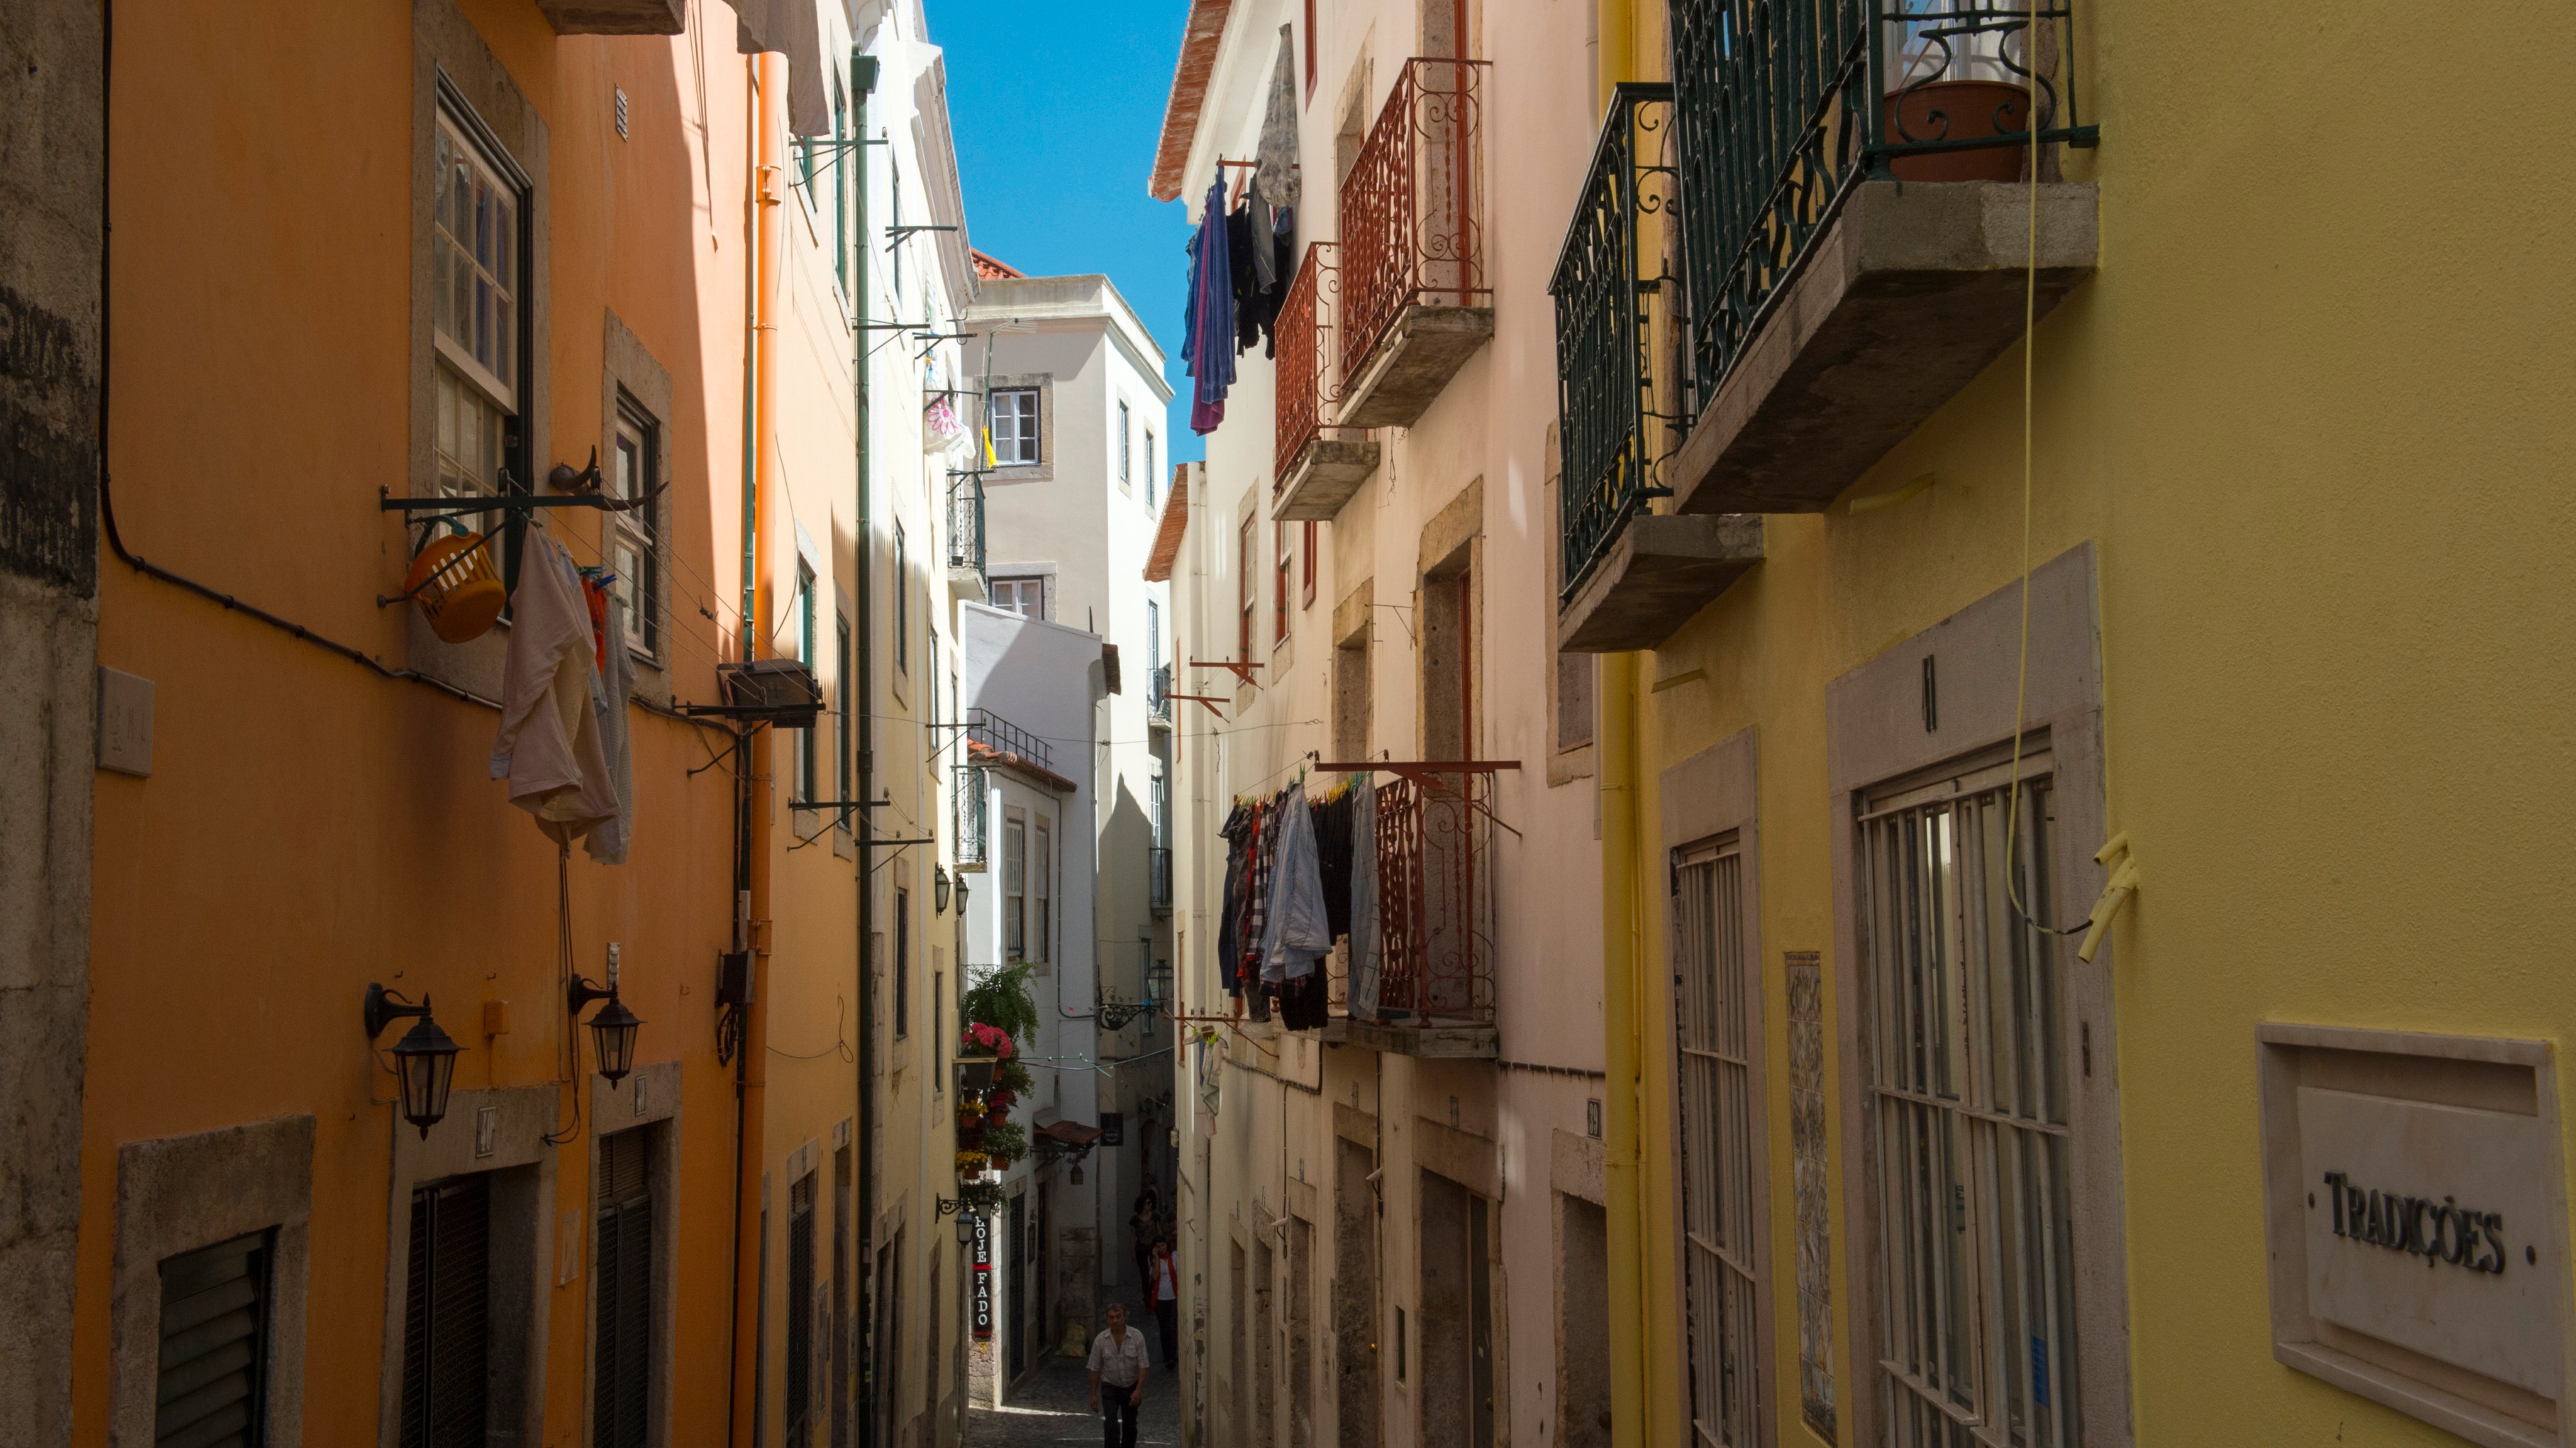 Street scene in the traditional Alfama, the old quarter of,